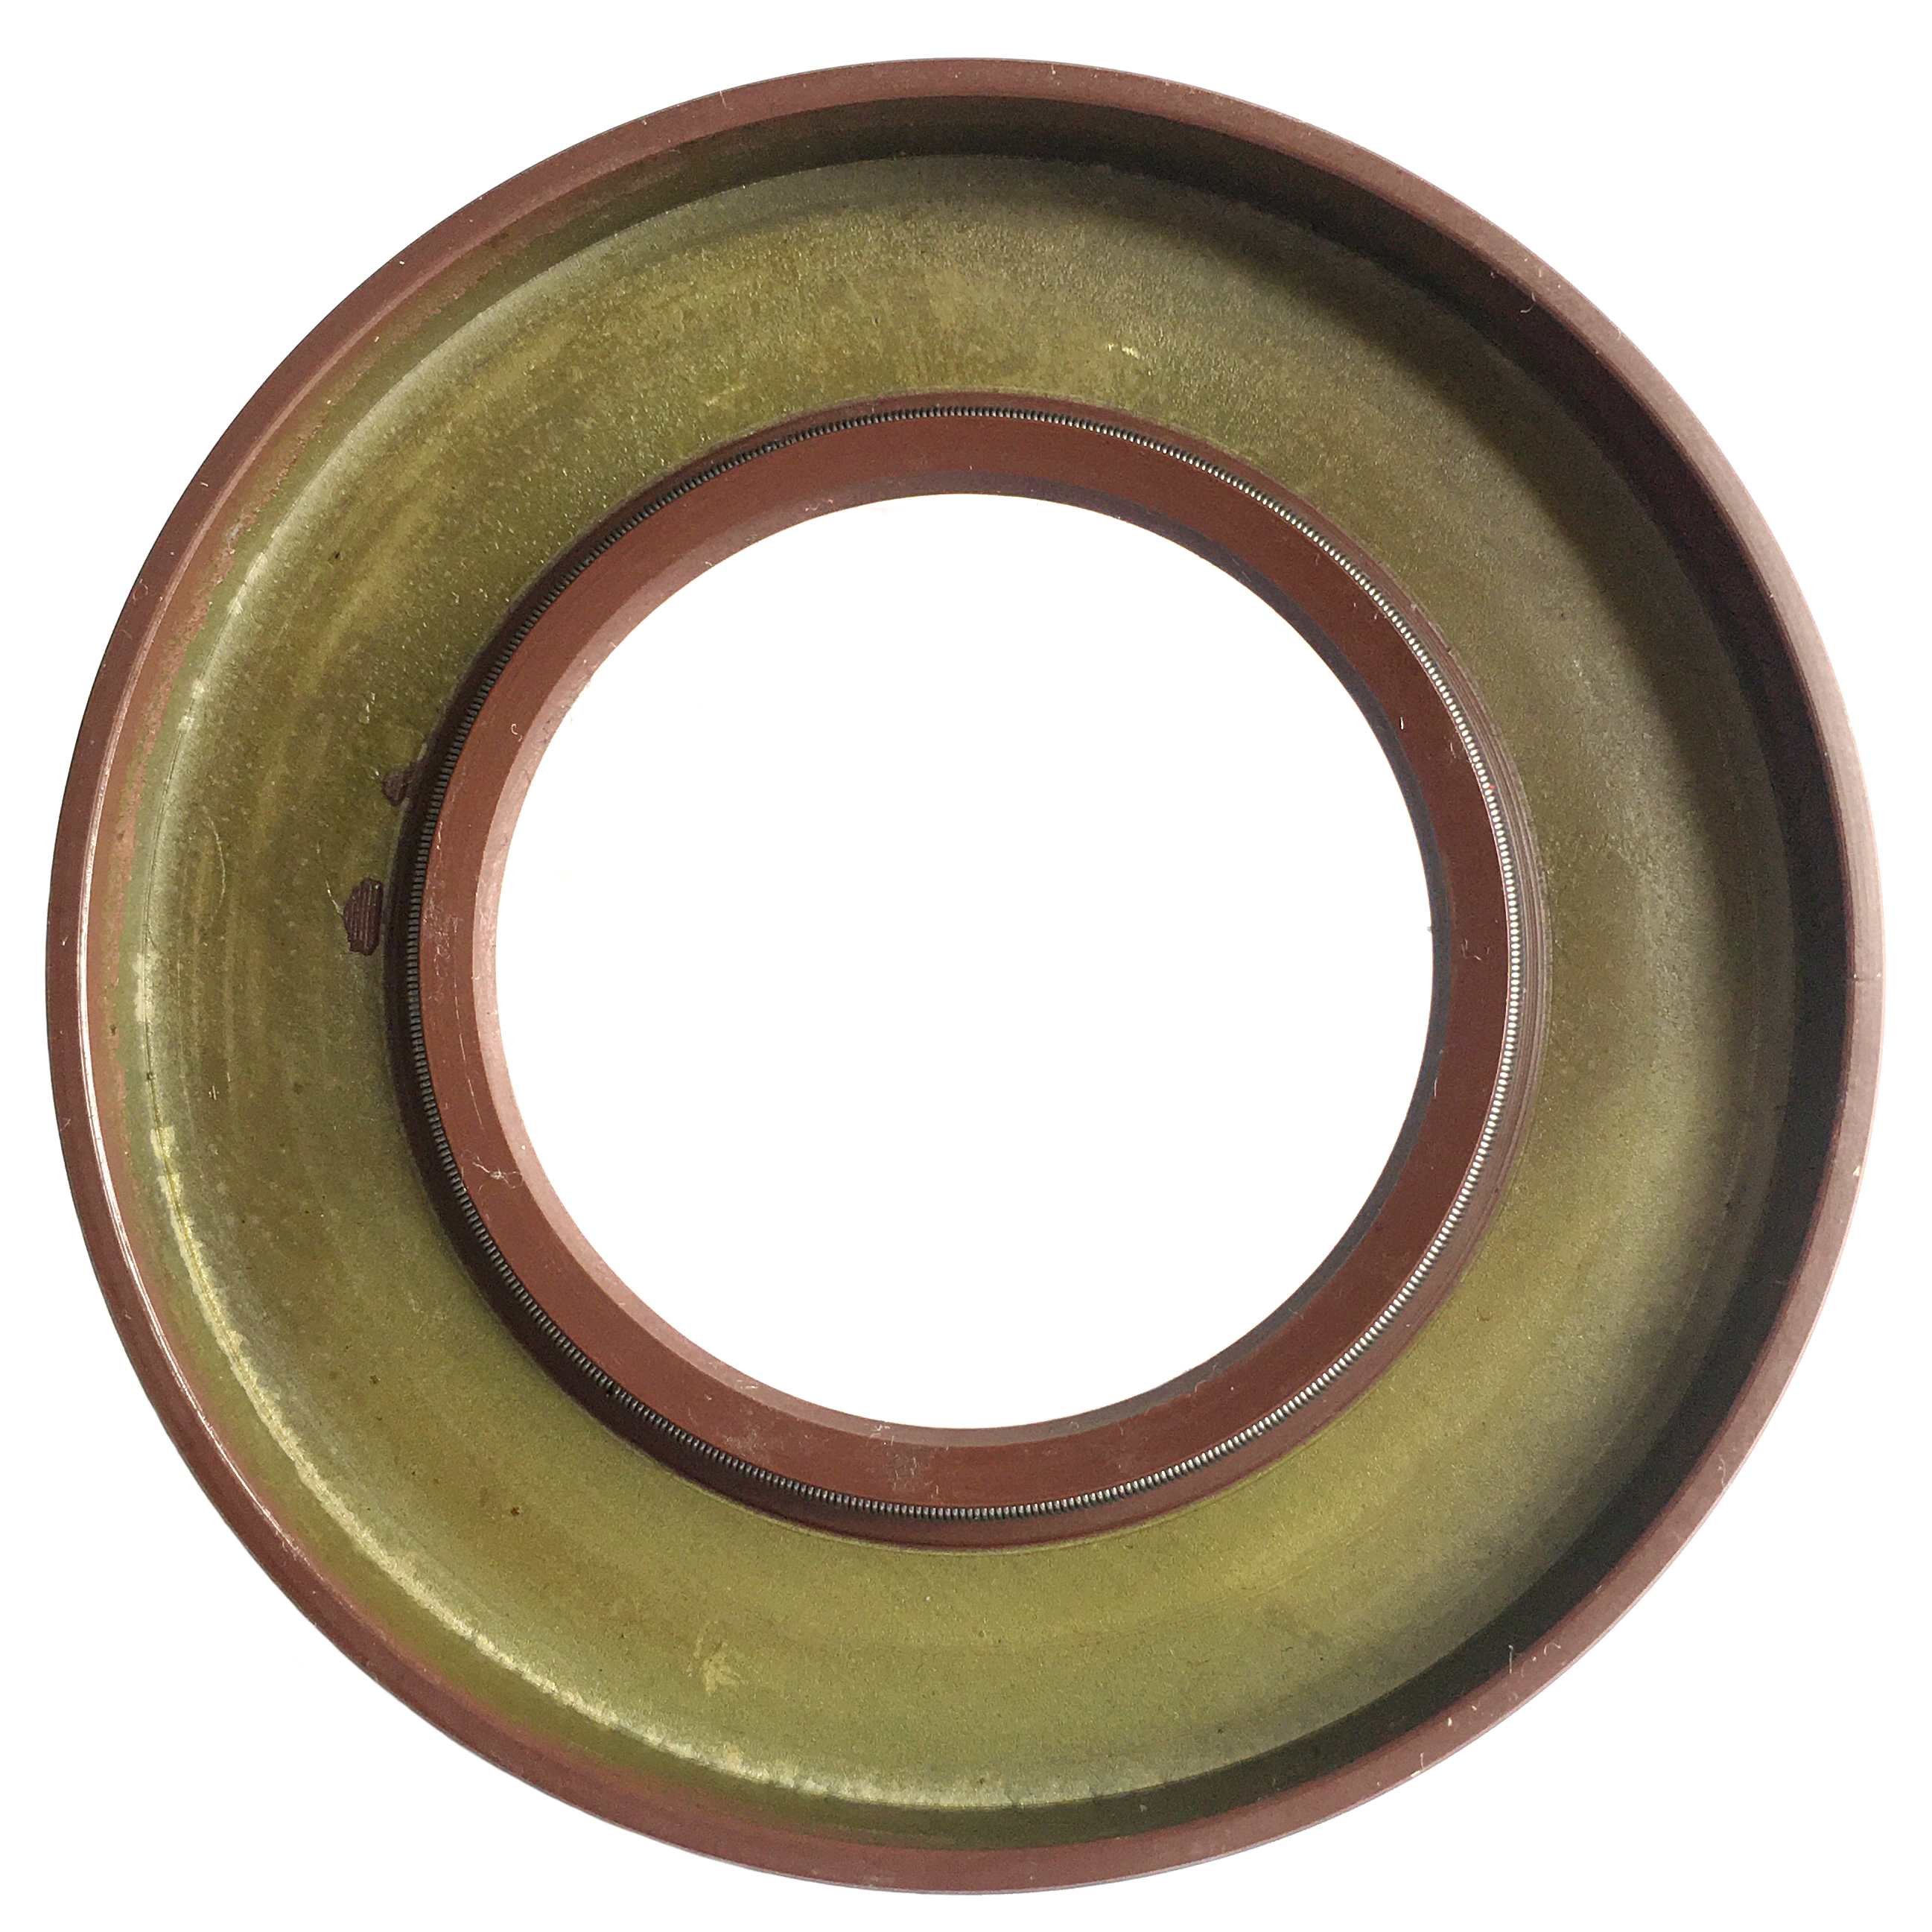 HTCL9Y 45*80*10/16.5 Differential Oil Seal For Geely Car